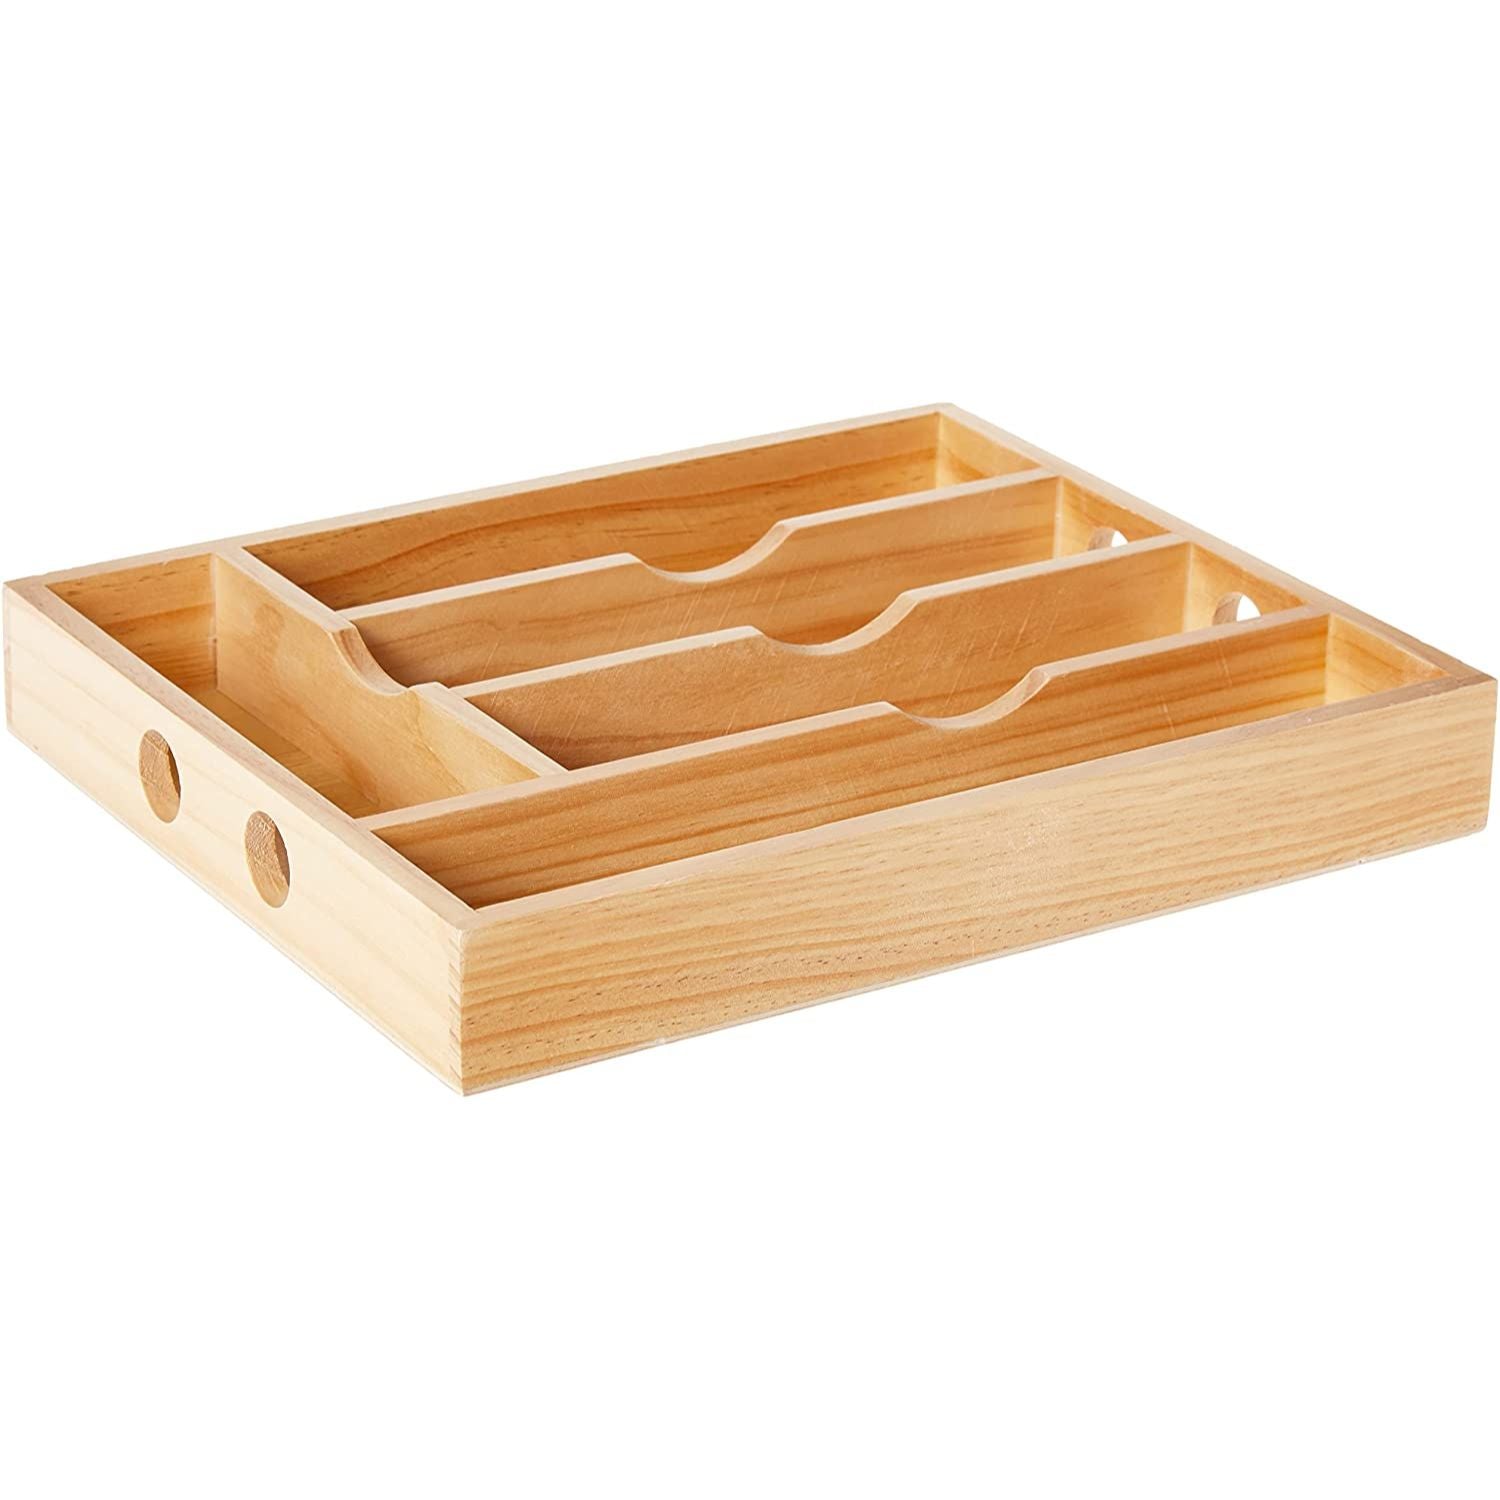 Hampton Forge Natural Wood Caddy Openstock by Hampton Forge